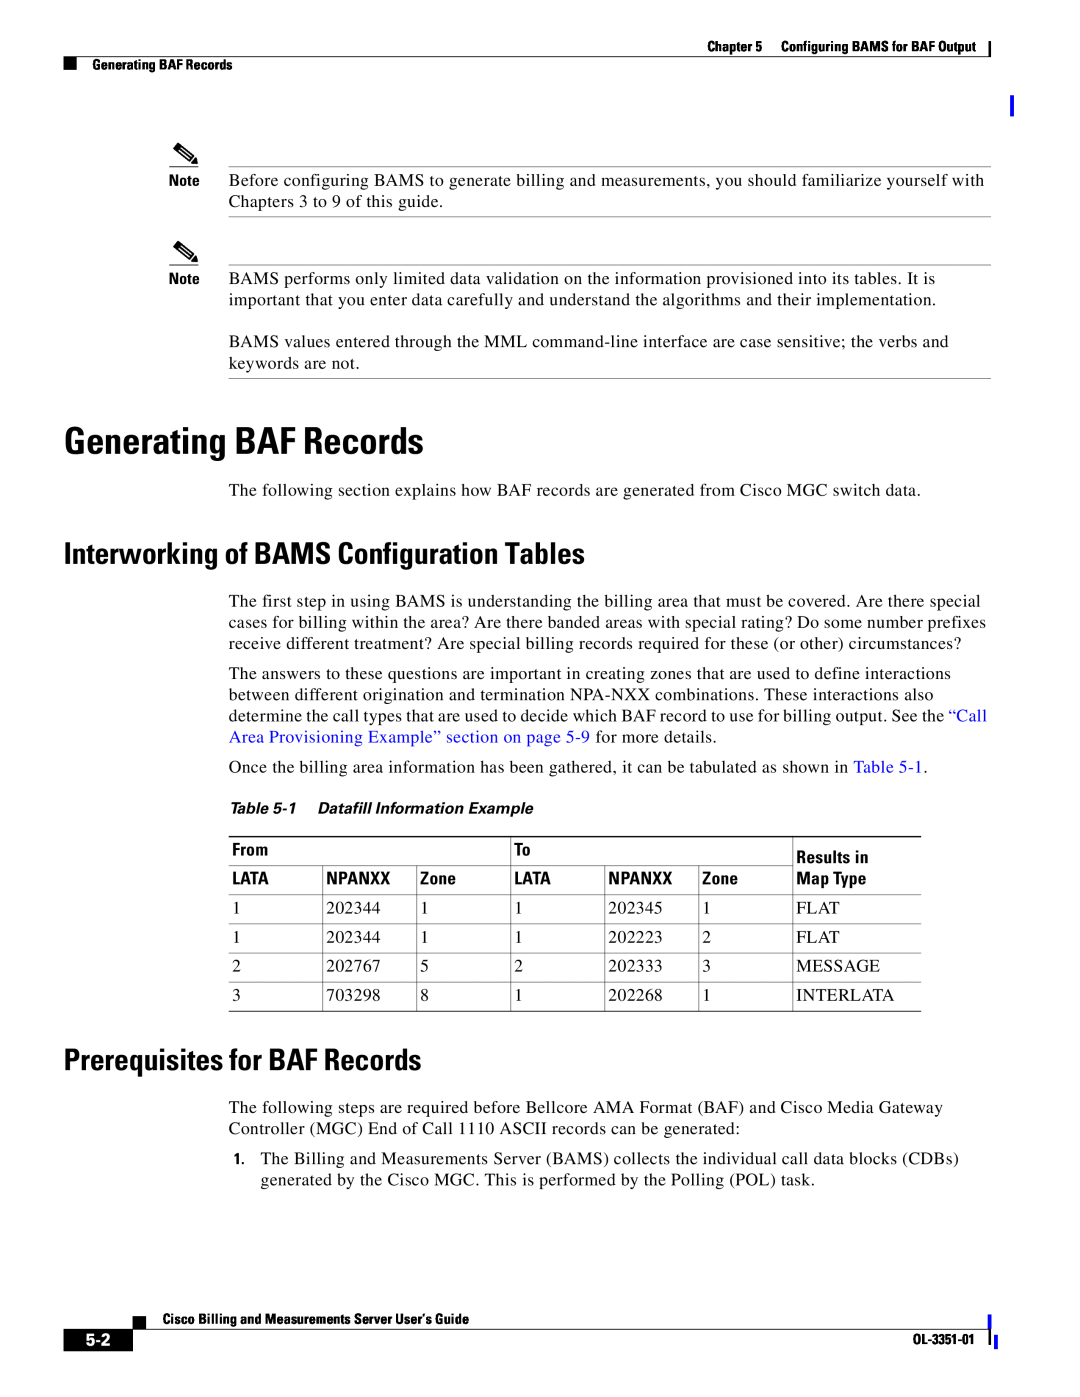 Cisco Systems OL-3351-01 Generating BAF Records, Interworking of BAMS Configuration Tables, Prerequisites for BAF Records 